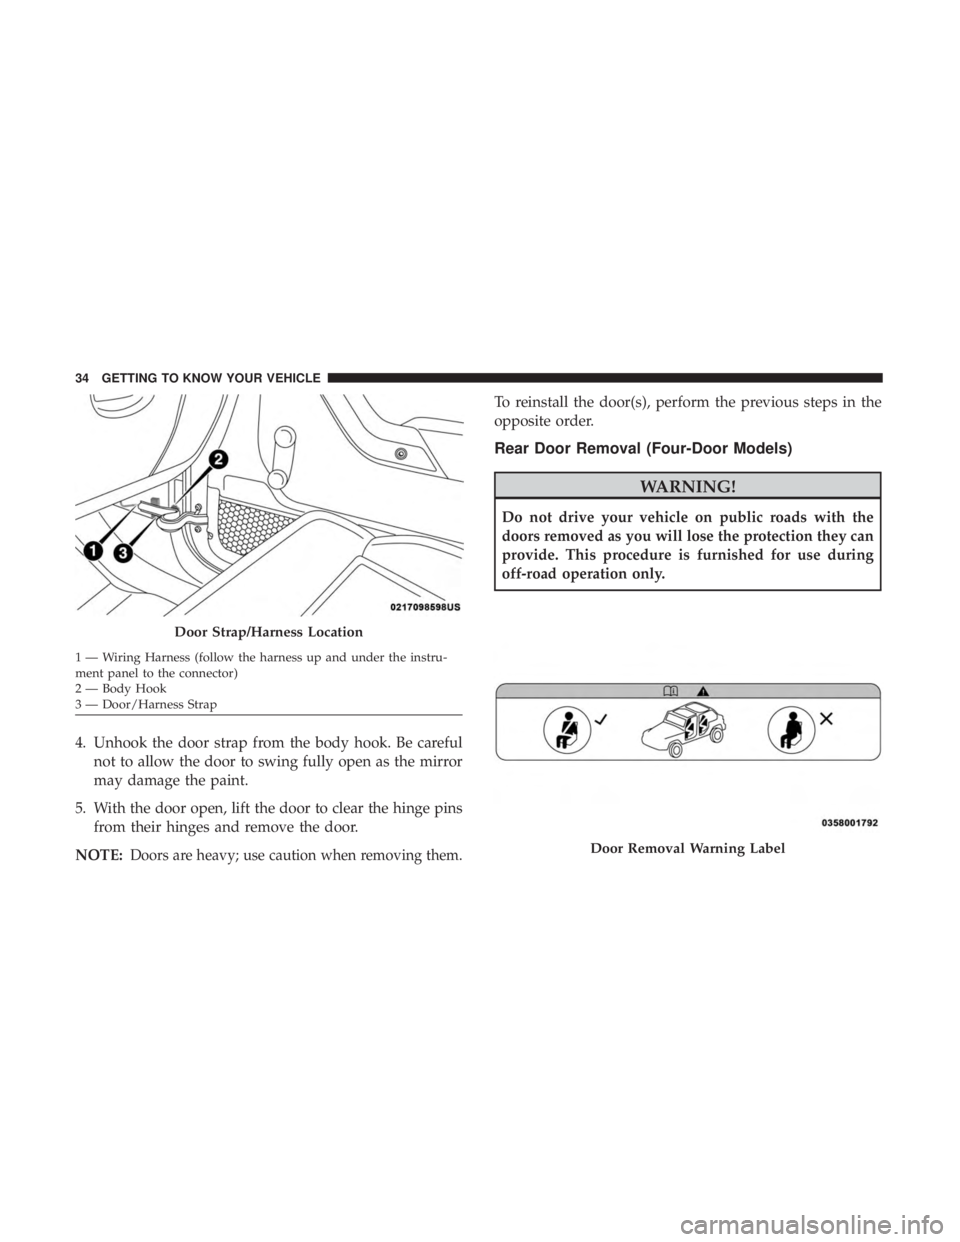 JEEP WRANGLER UNLIMITED SPORT 2016  Owners Manual 4. Unhook the door strap from the body hook. Be carefulnot to allow the door to swing fully open as the mirror
may damage the paint.
5. With the door open, lift the door to clear the hinge pins from t